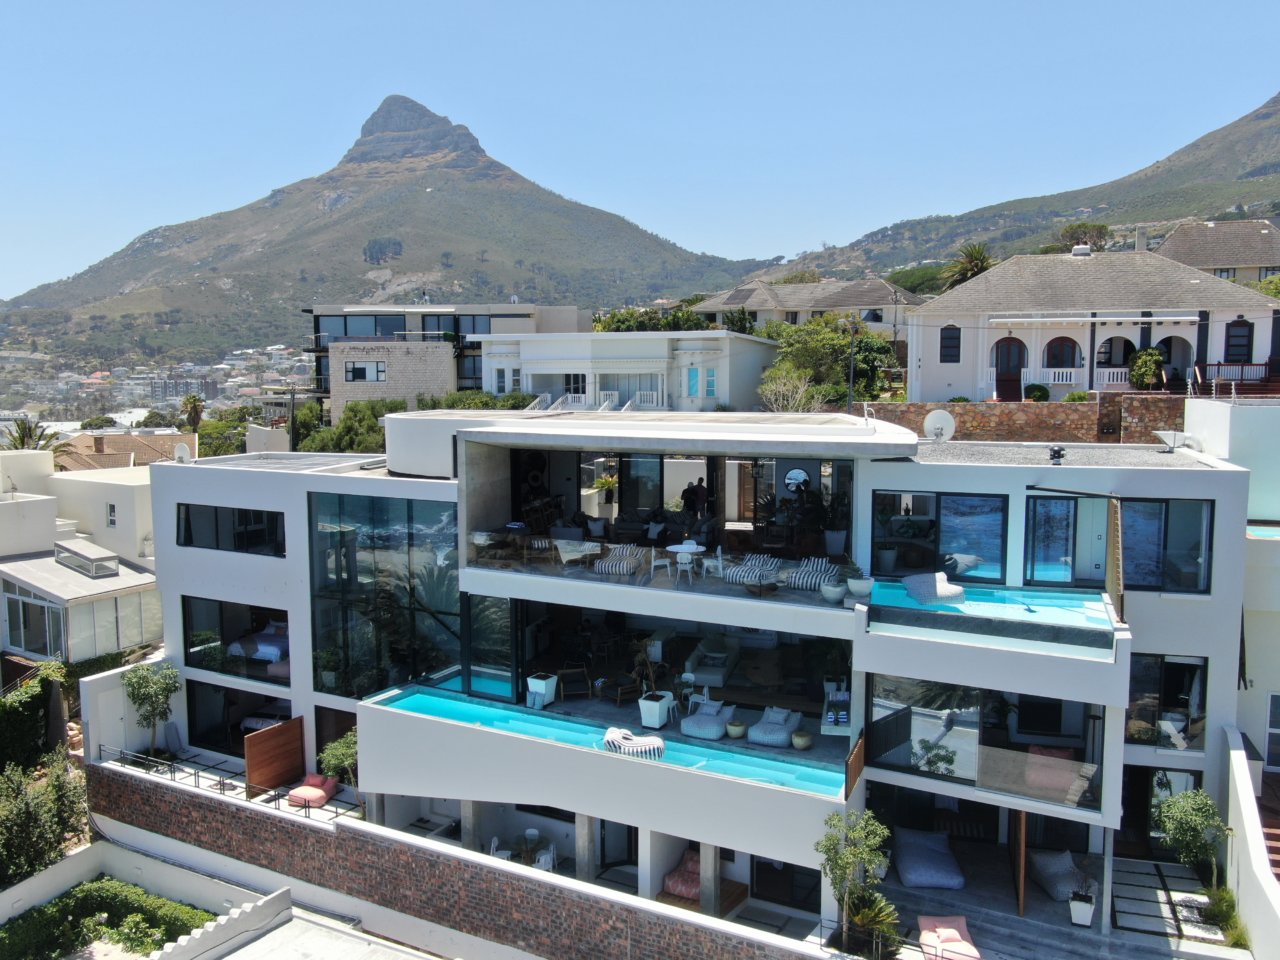 Photo 2 of Camps Bay Beach Villa accommodation in Camps Bay, Cape Town with 4 bedrooms and 4 bathrooms